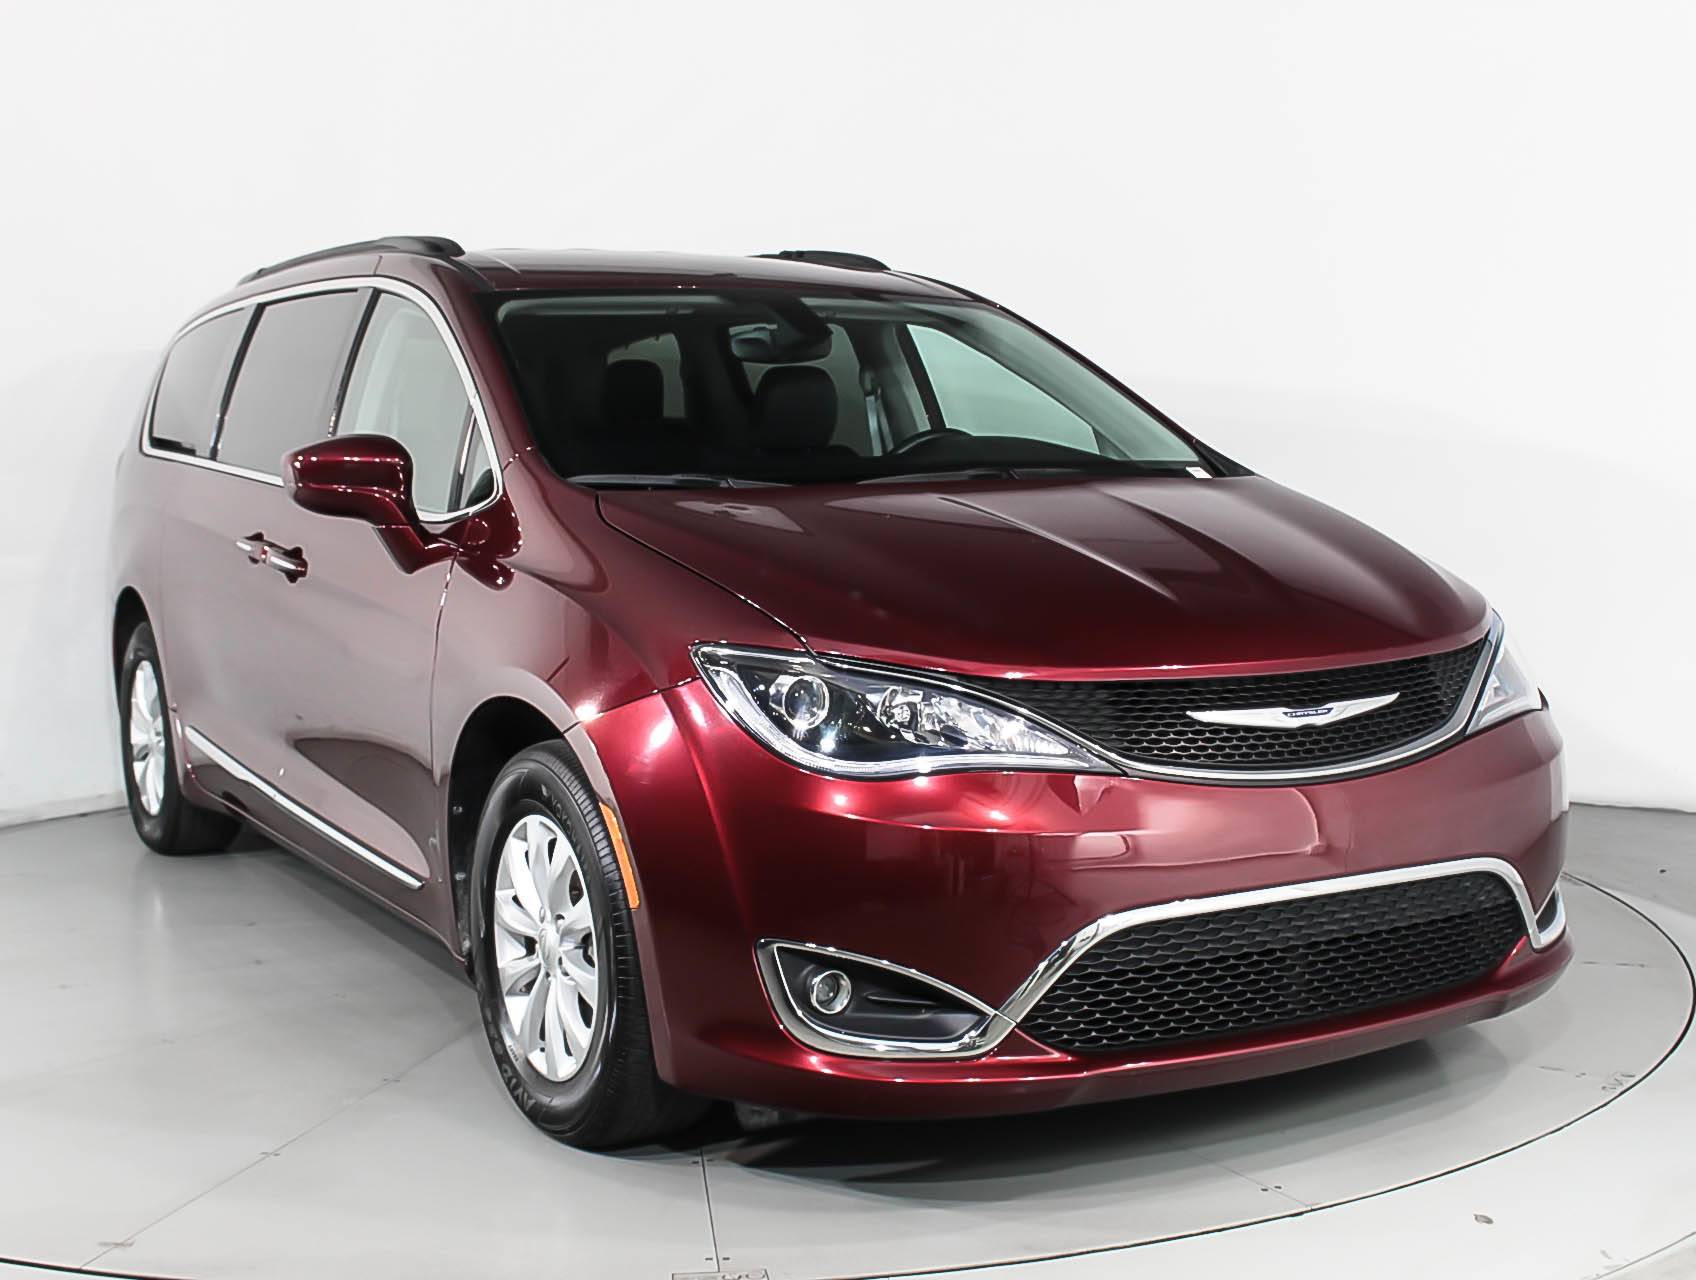 Florida Fine Cars - Used CHRYSLER PACIFICA 2017 MARGATE TOURING L